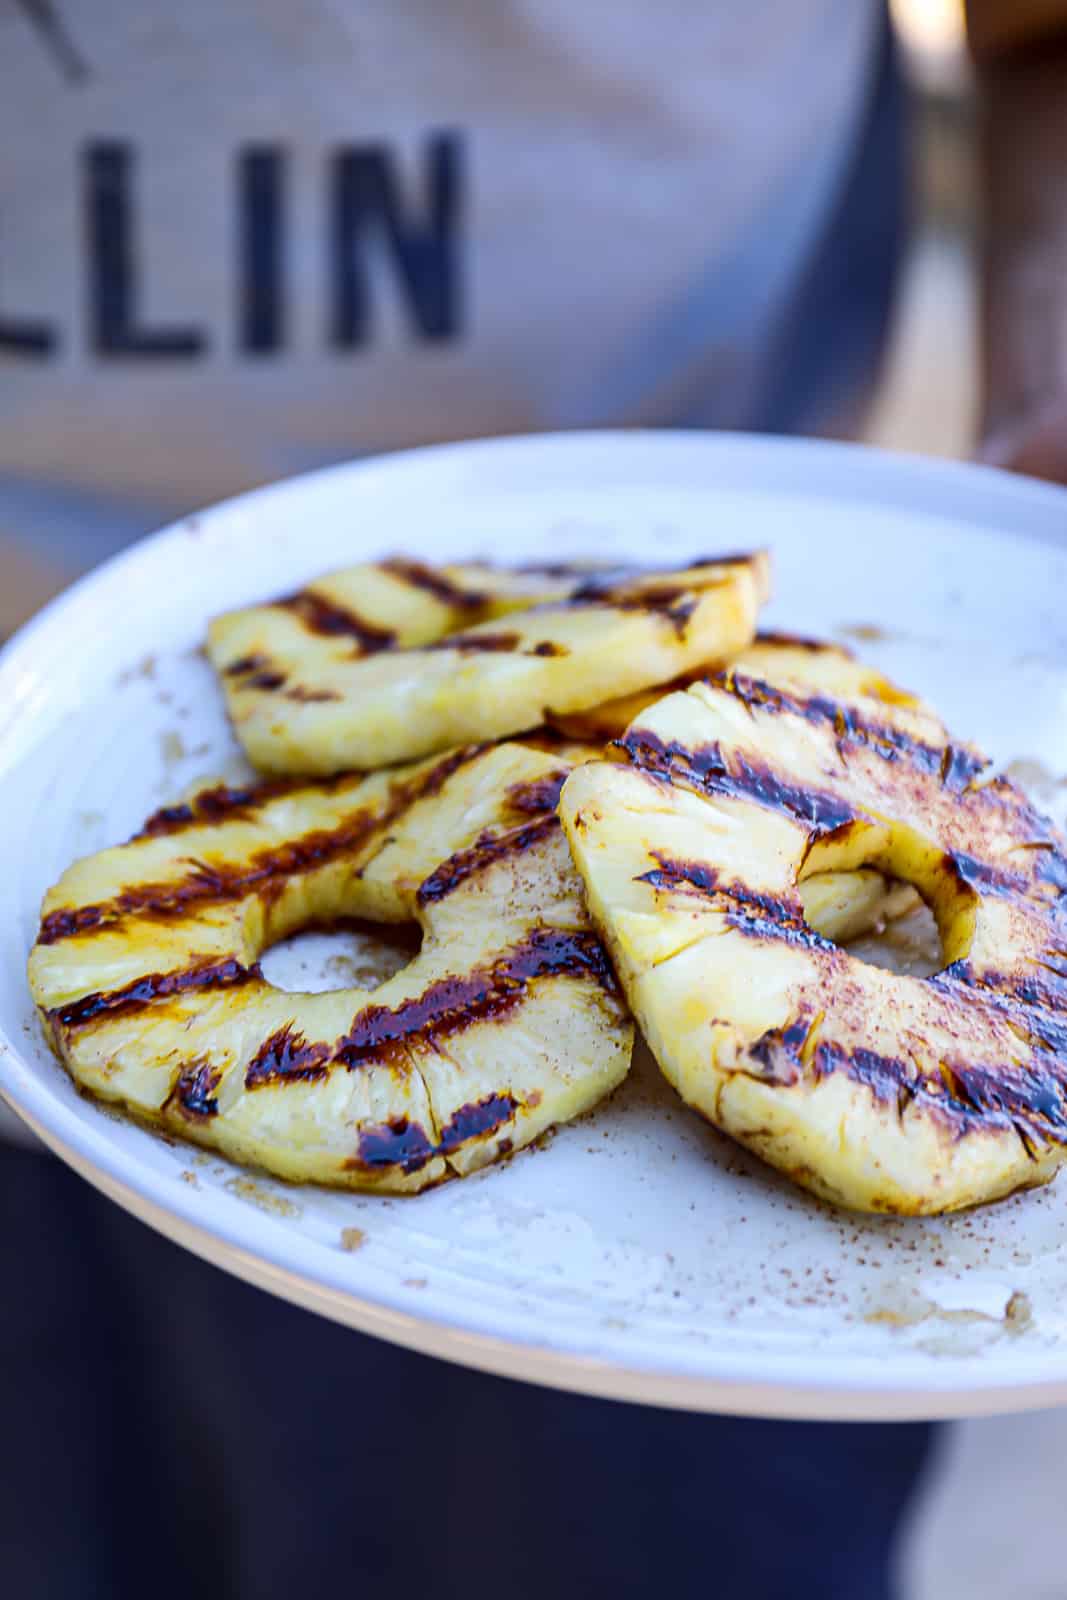 Grilled Sliced Pineapple Side Dish Recipe